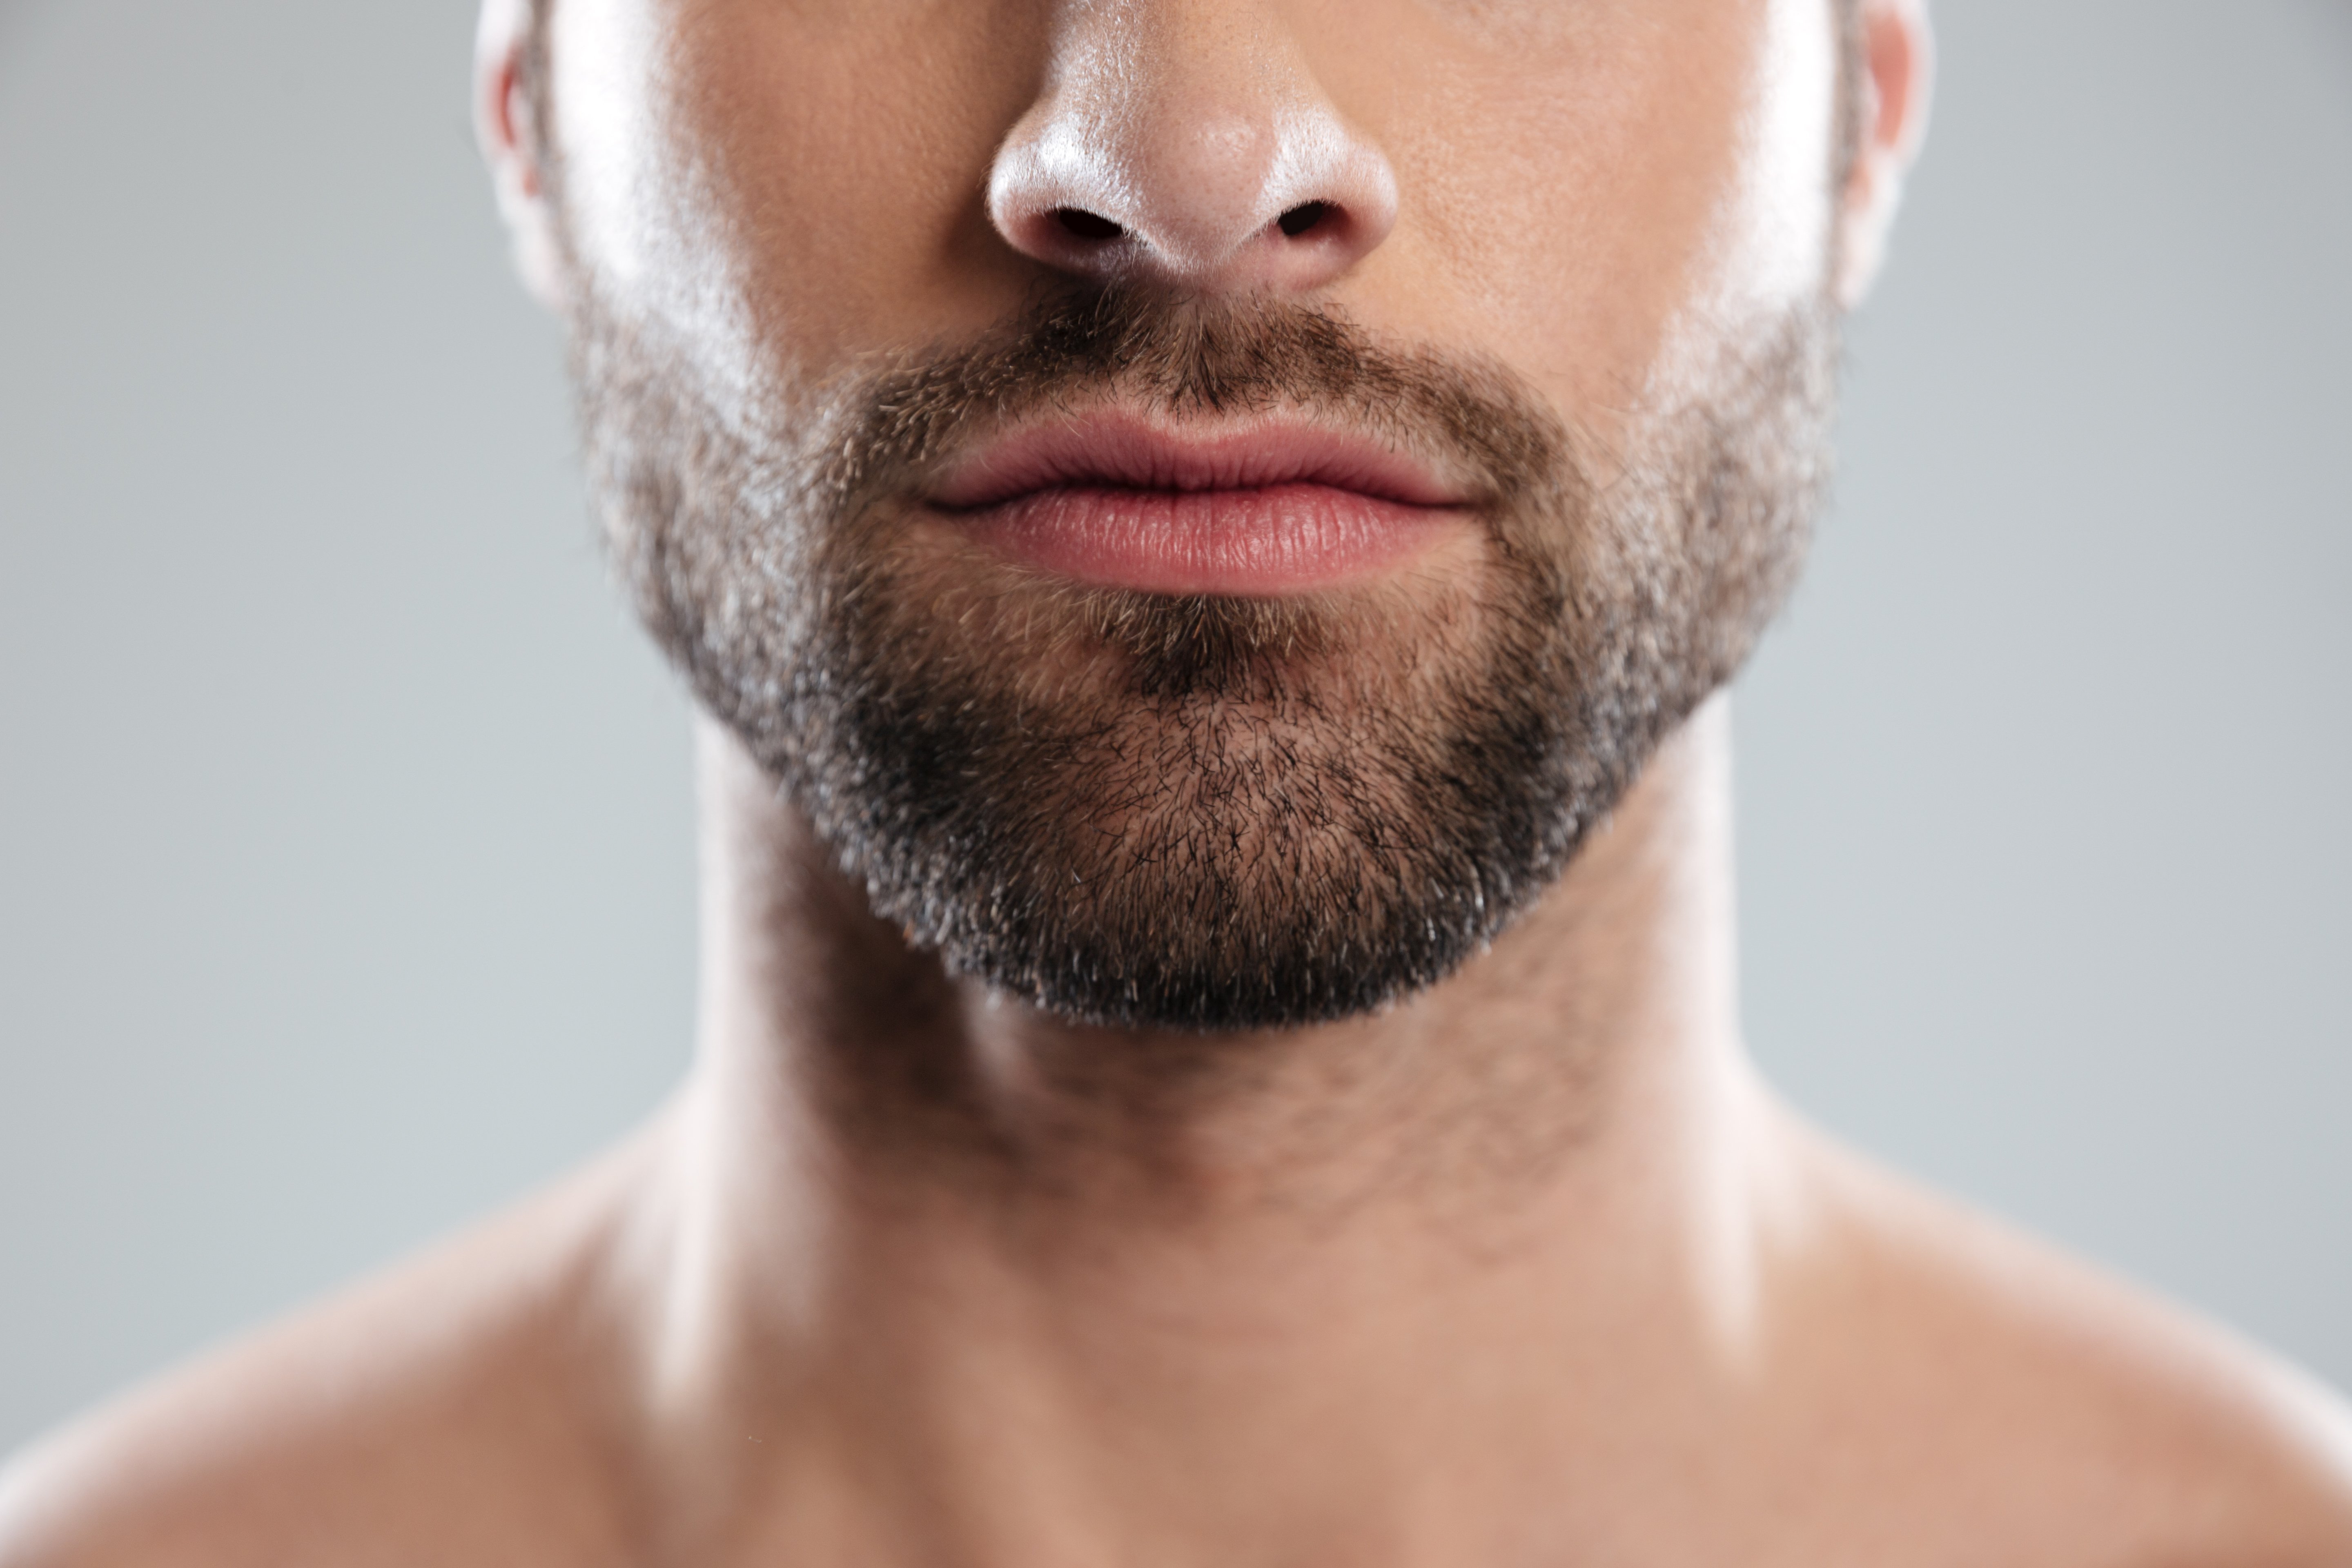 How Is Beard And Moustache Transplant Performed?